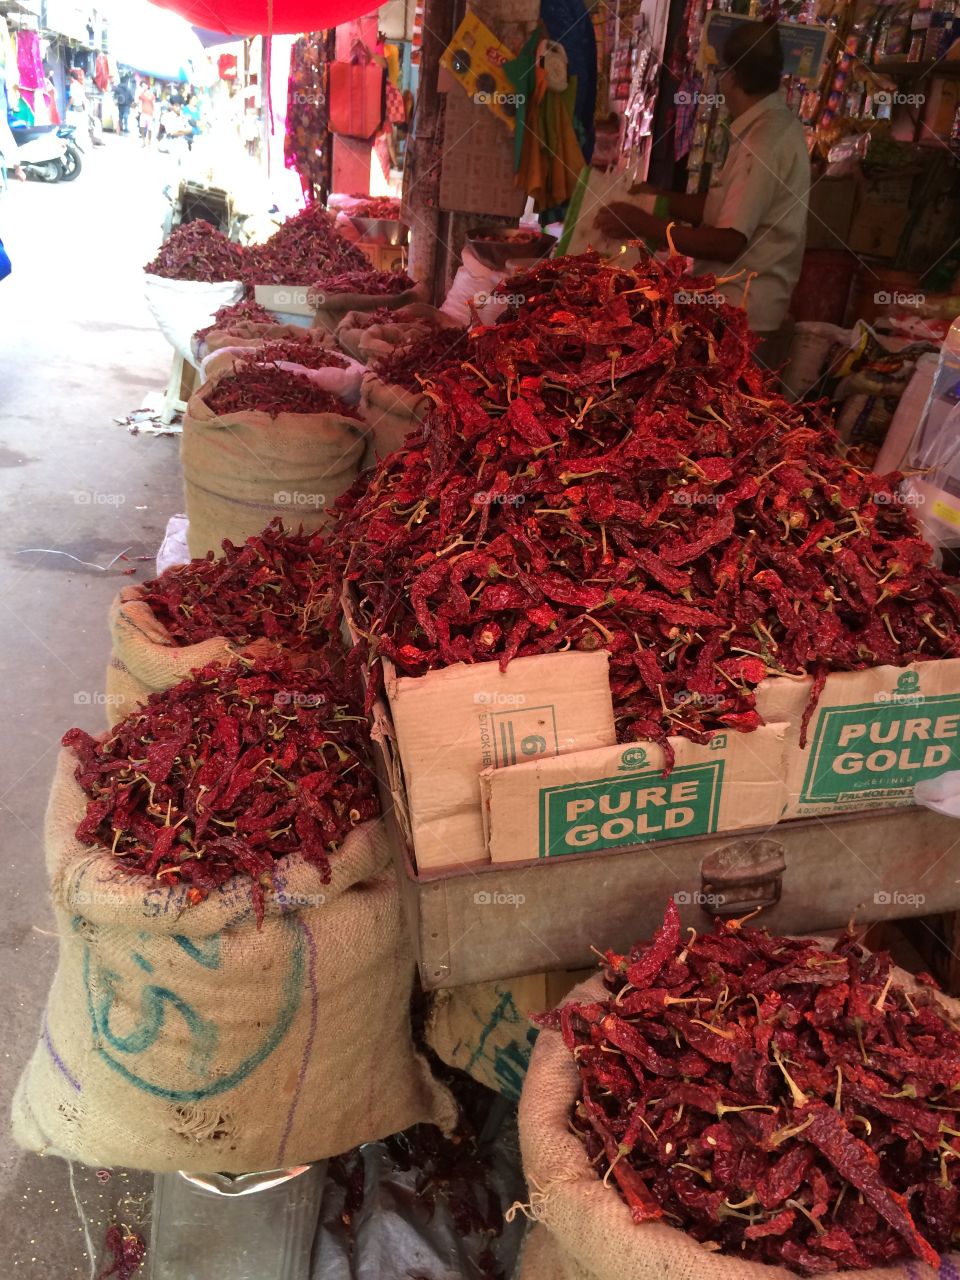 Chilies Chilies Chilies . Do you wanna some chili? Photo shot in the Indian market 